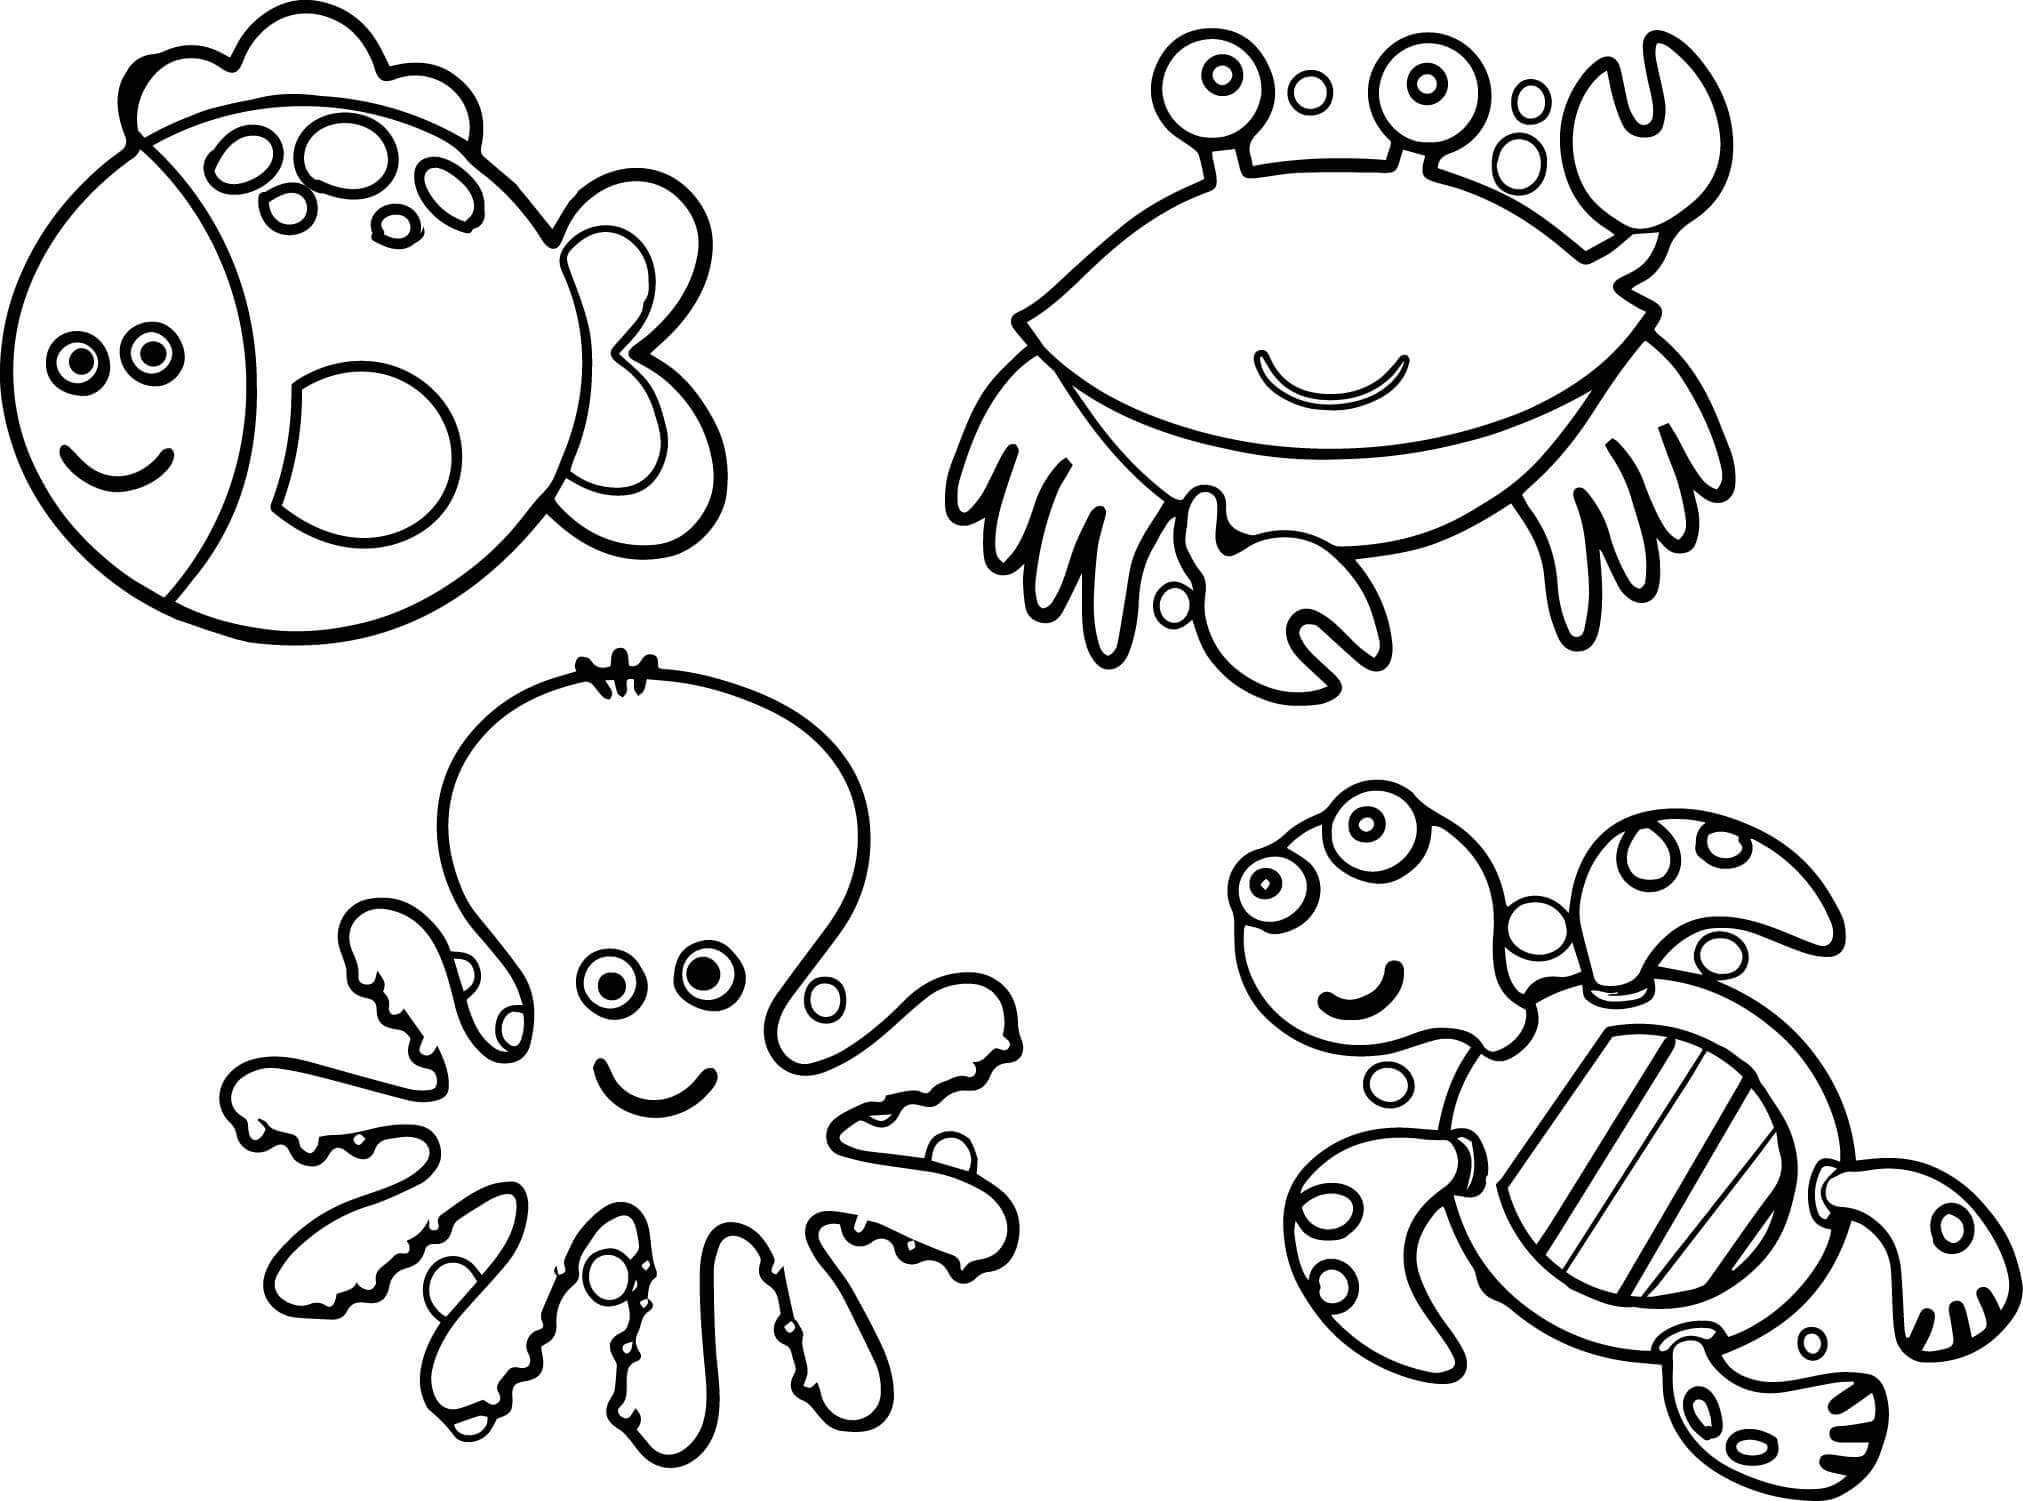 Cute Sea Animals Coloring Page for Kids